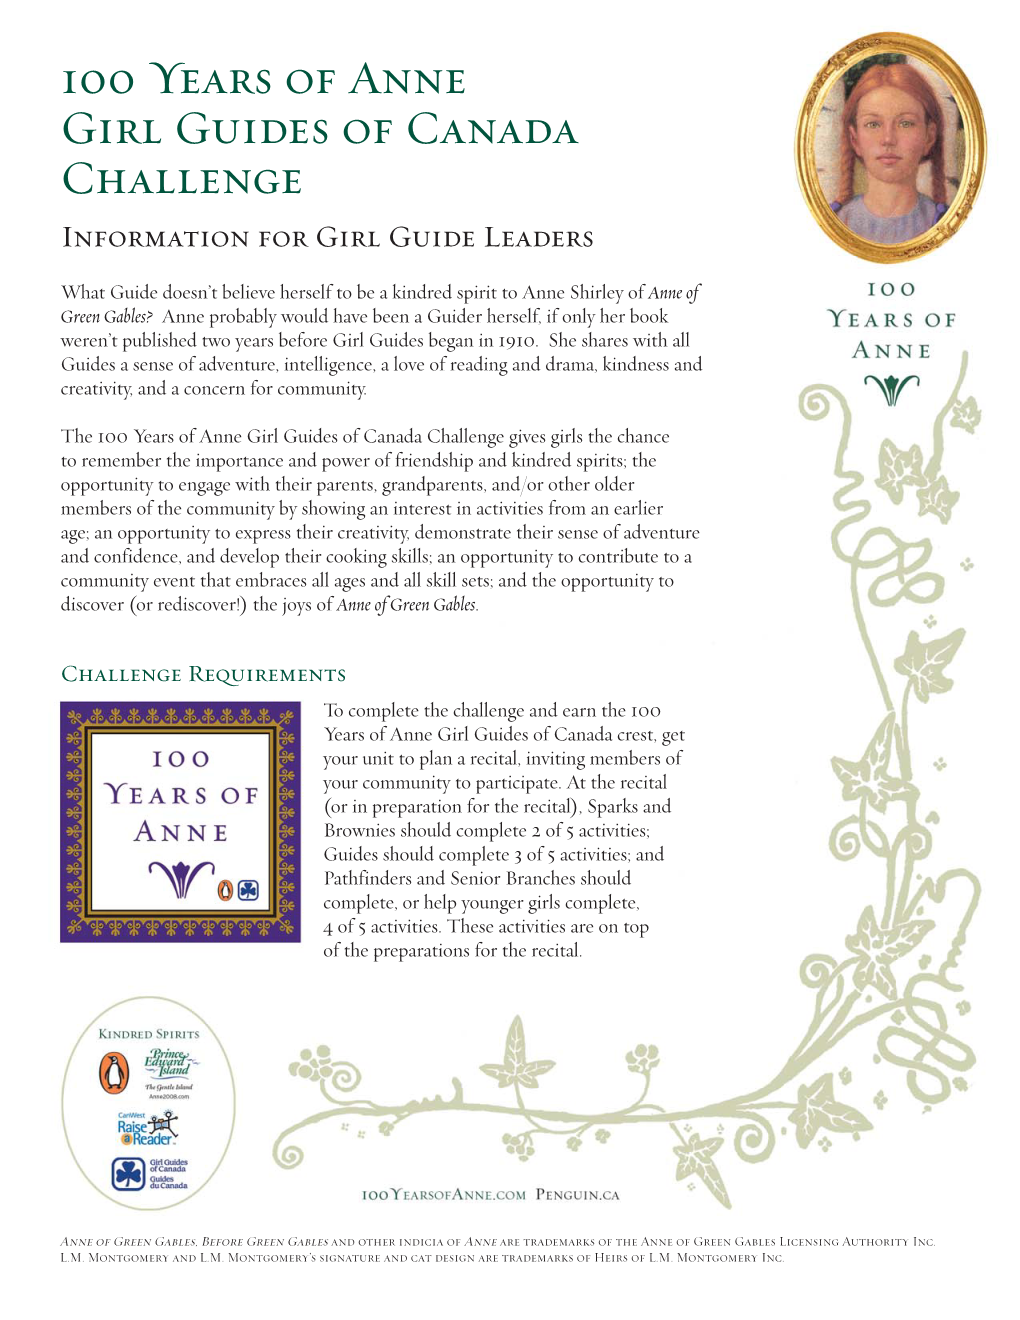 100 Years of Anne Girl Guides of Canada Challenge Information for Girl Guide Leaders